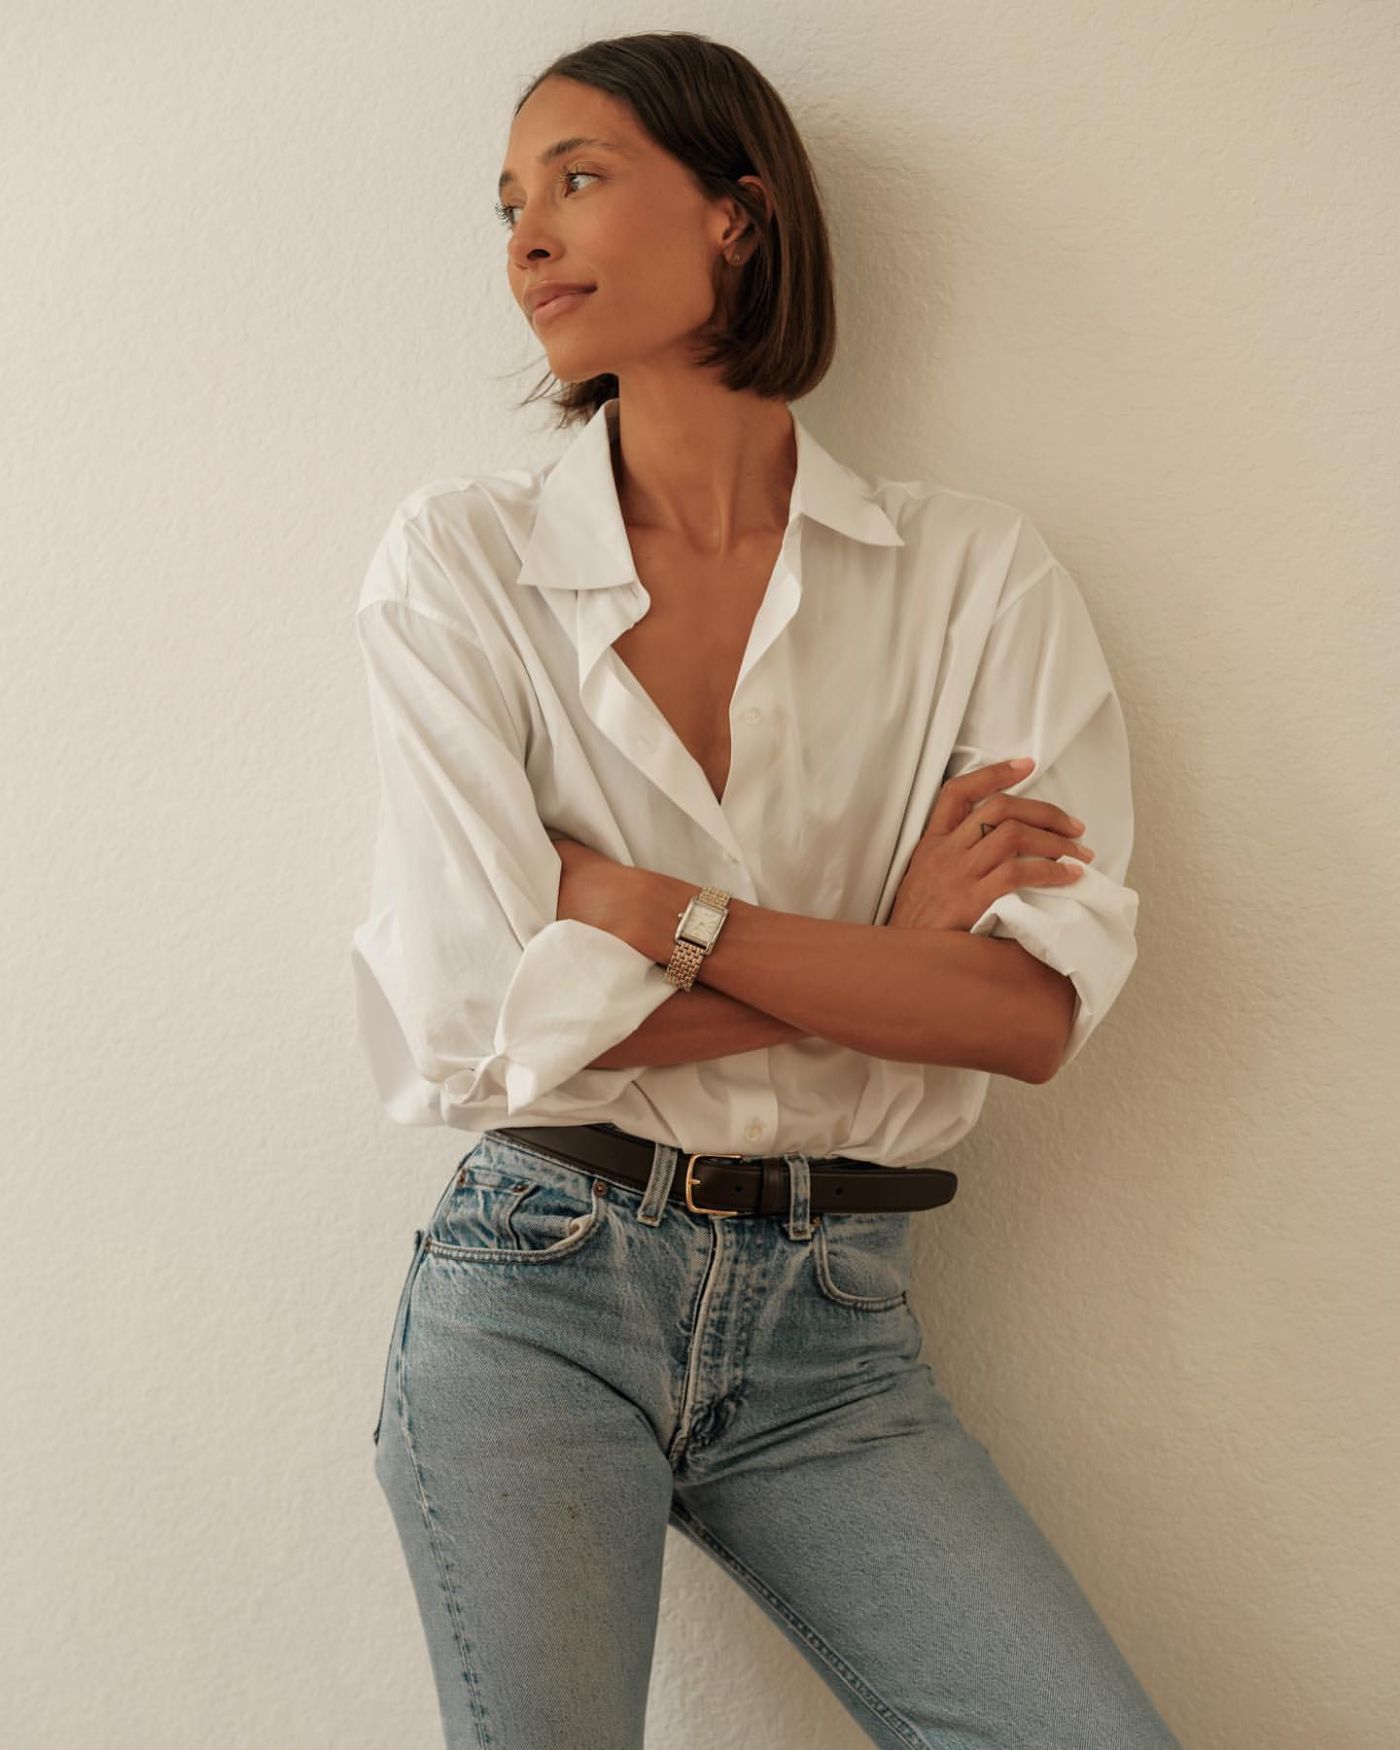 Vintage Levi’s Jeans and Relaxed White Shirt